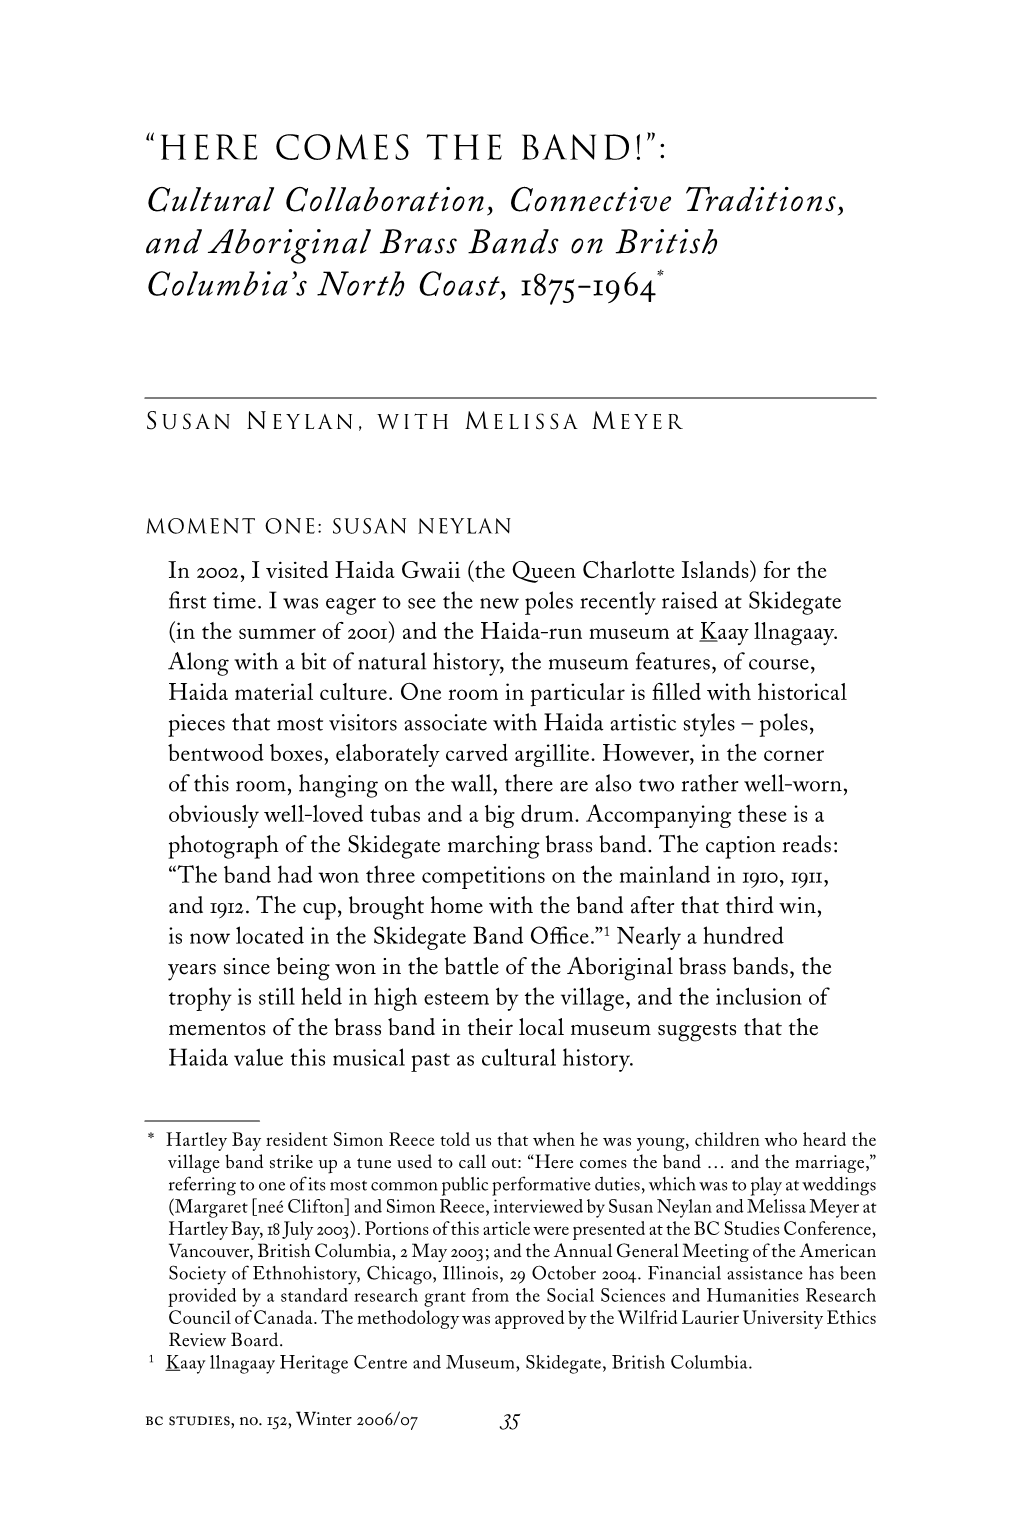 Cultural Collaboration, Connective Traditions, and Aboriginal Brass Bands on British Columbia's North Coast, 1875-1964